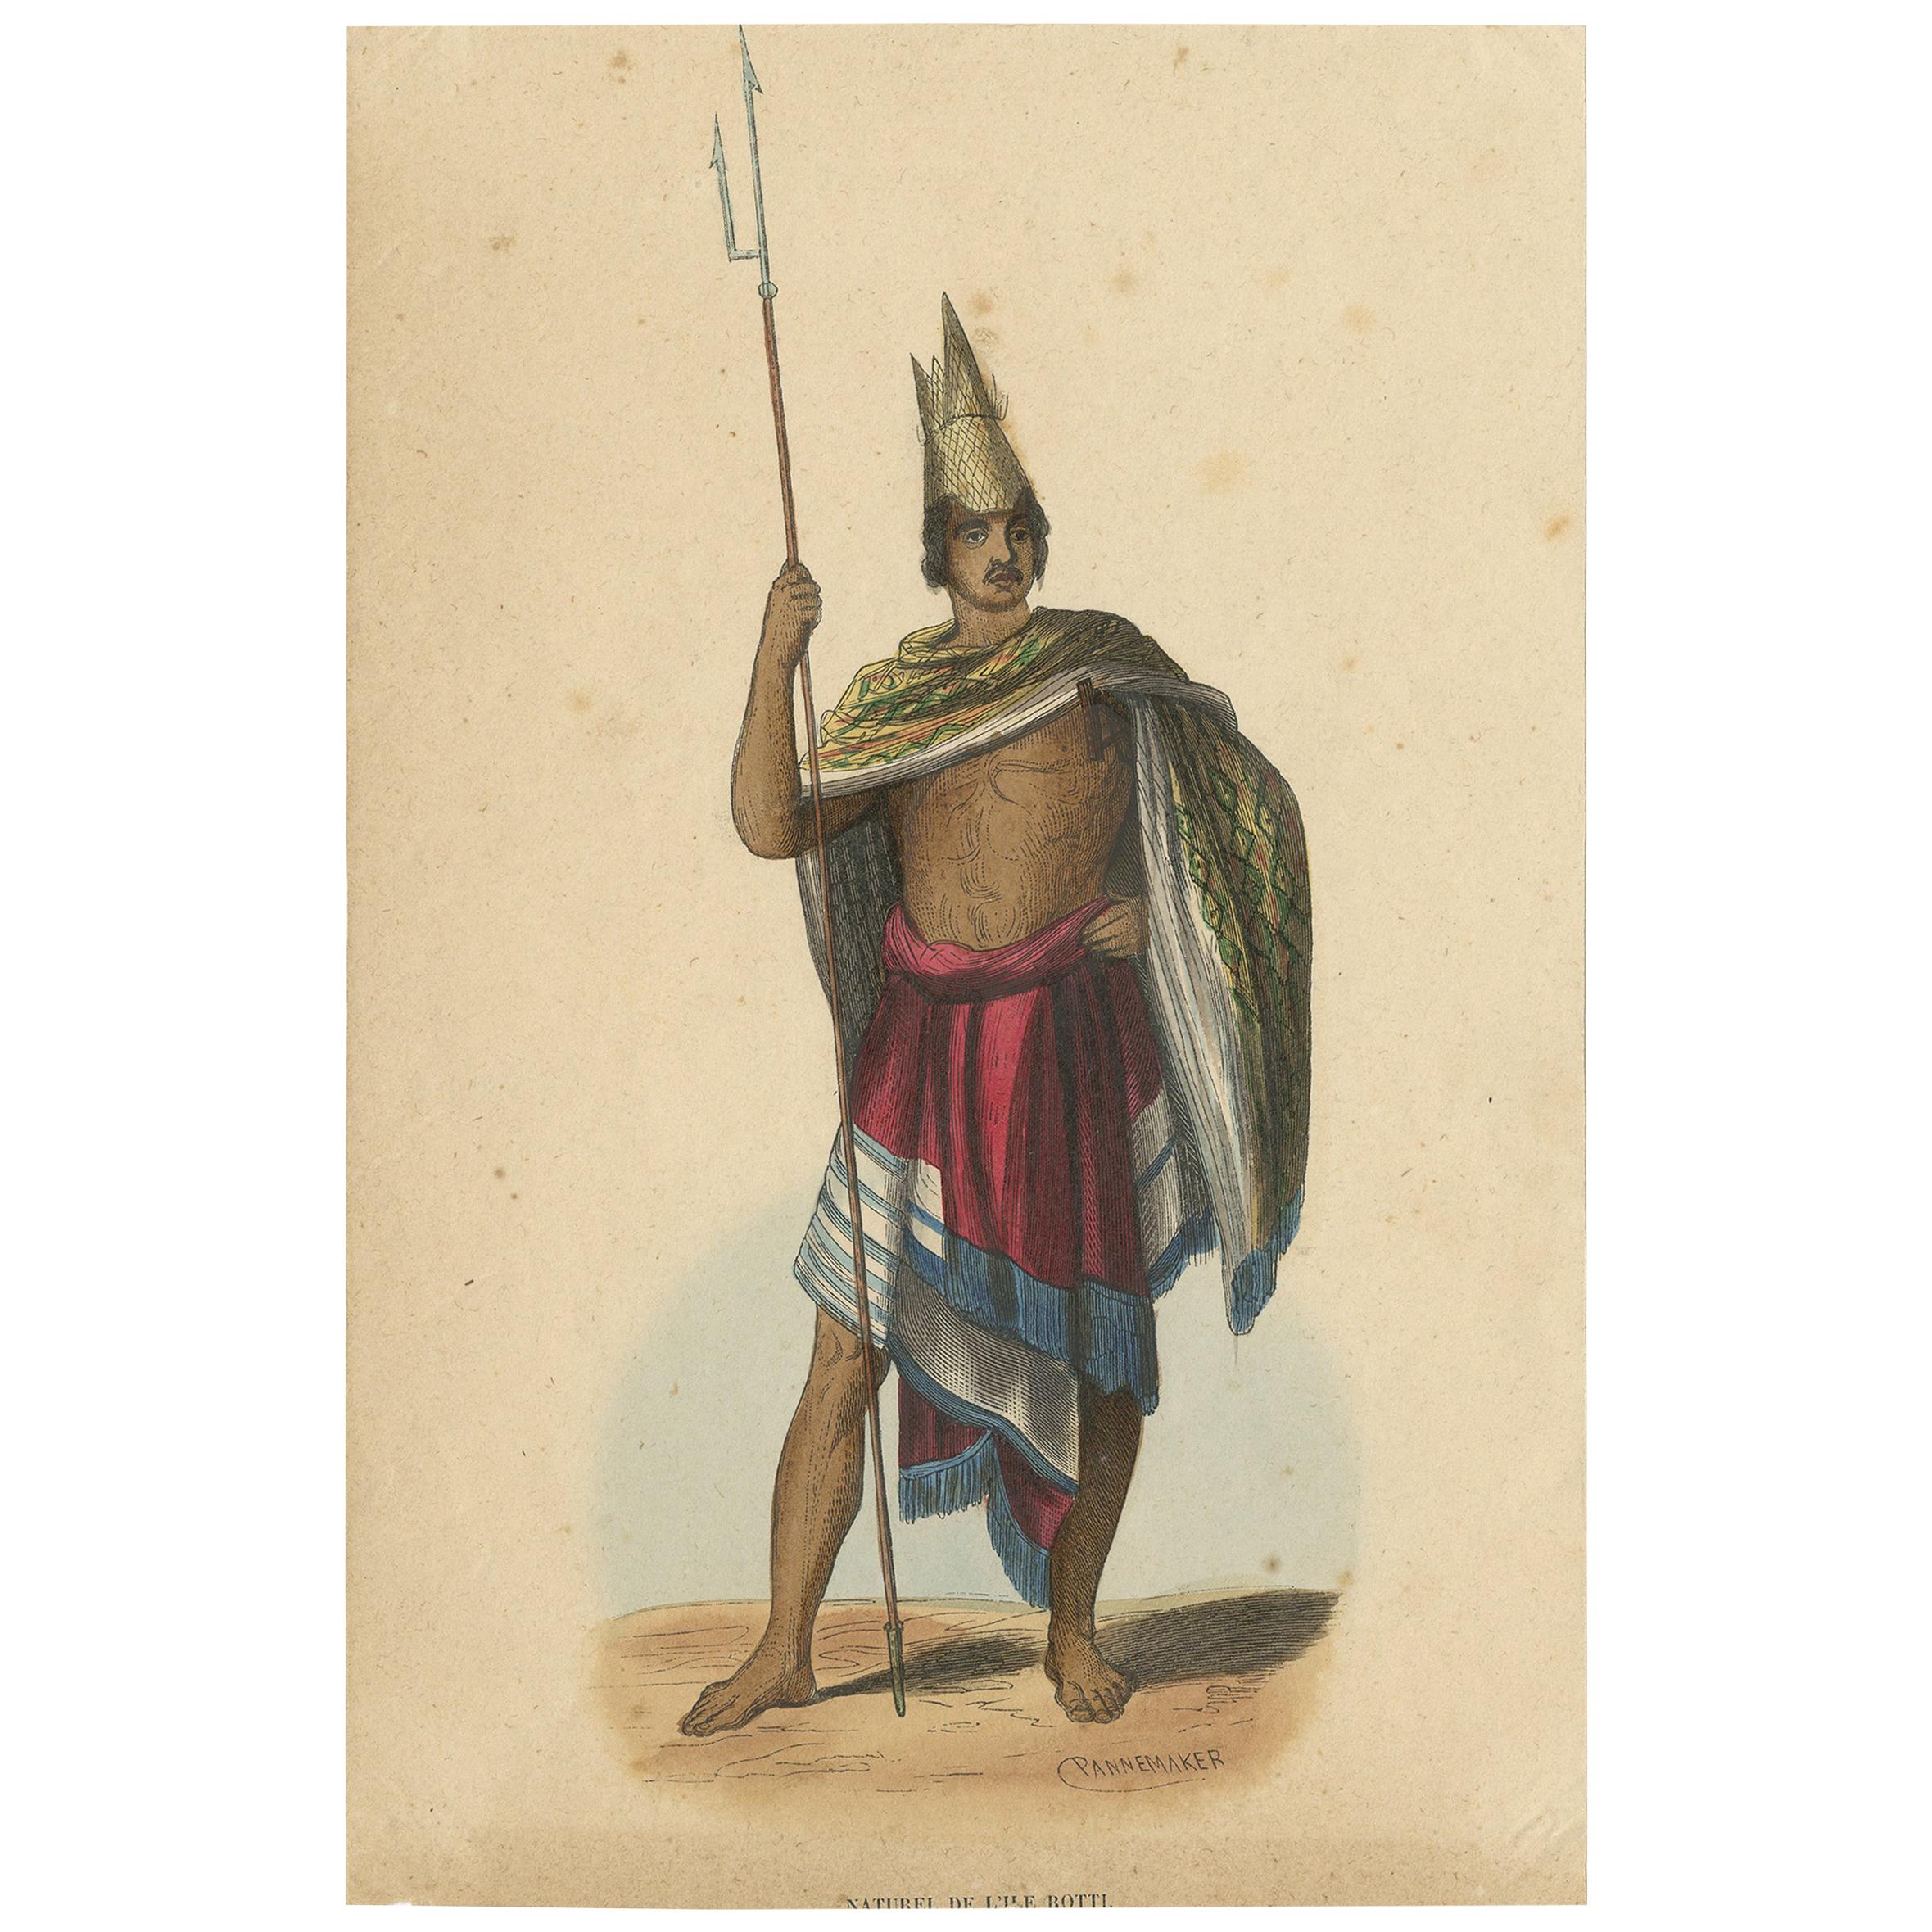 Antique Costume Print of an Inhabitant of Rote Island by Wahlen, 1843